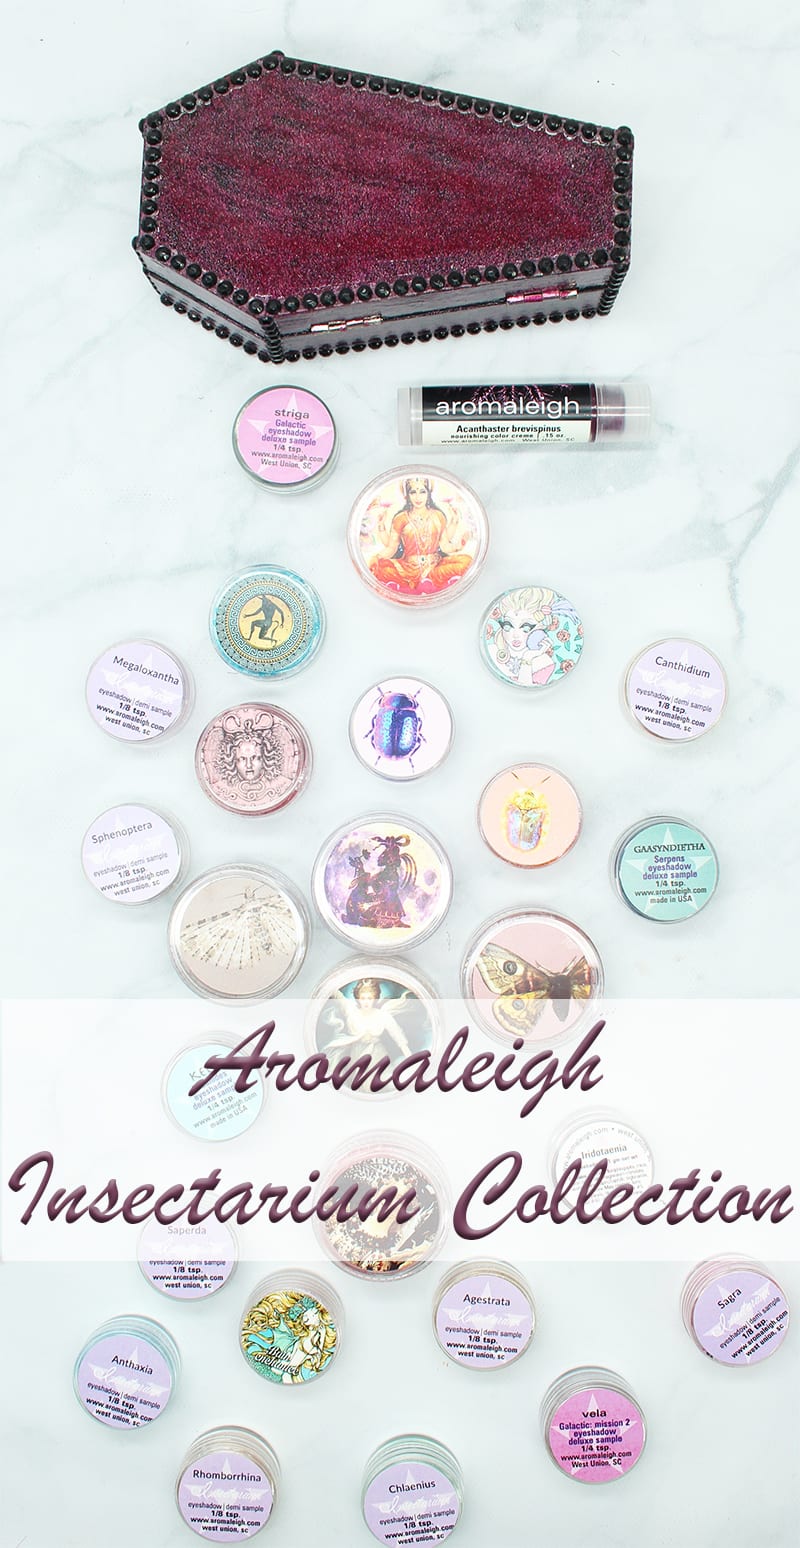 Aromaleigh Insectarium Collection Vol 1, Vol 2, Contours & More - Review, Swatches